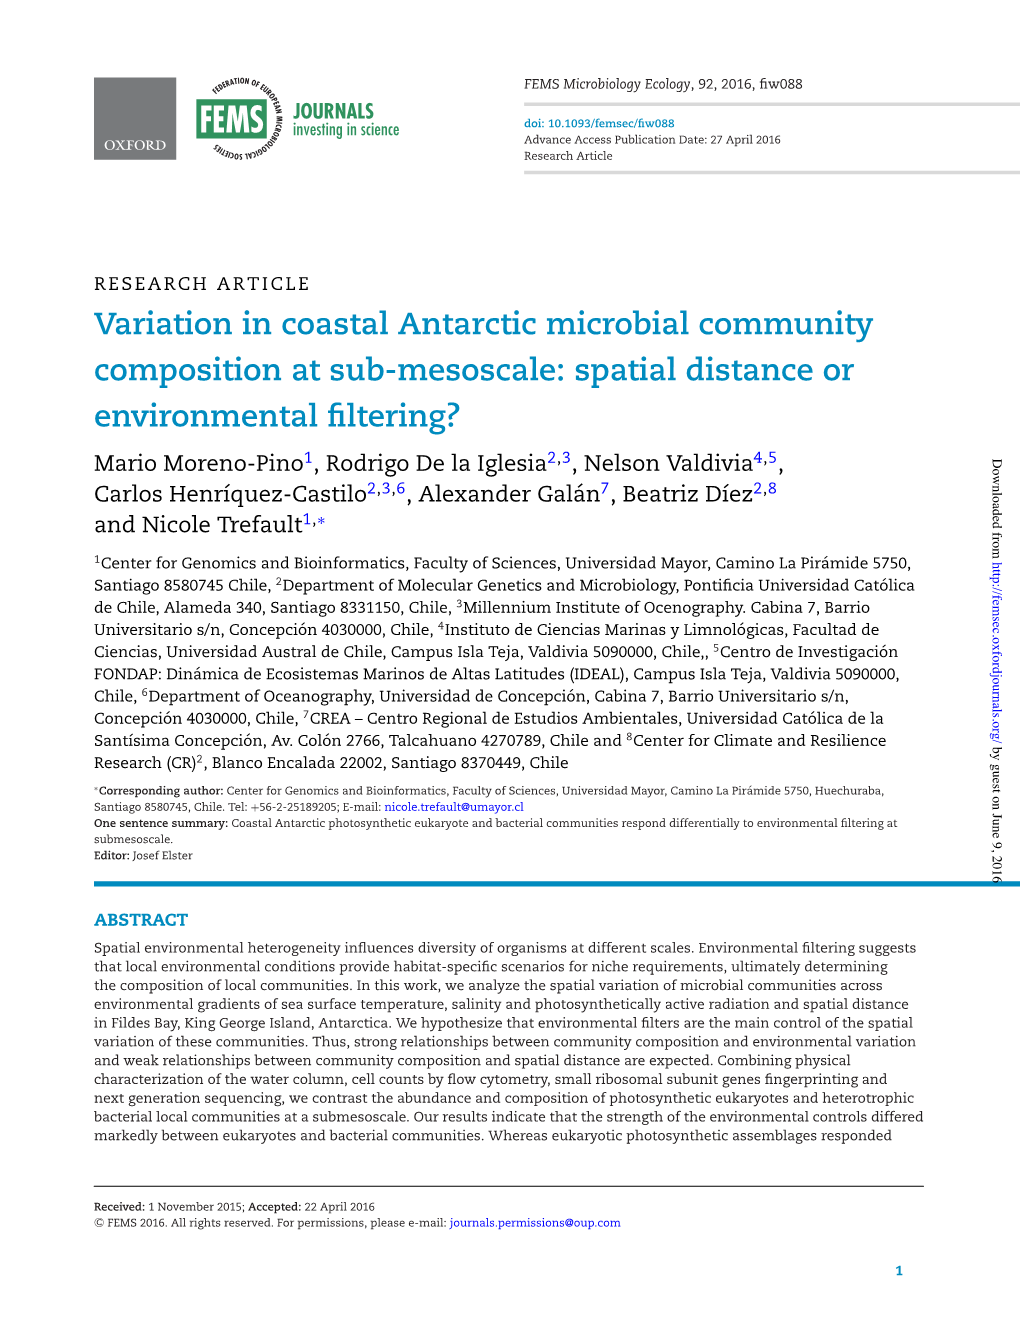 Variation in Coastal Antarctic Microbial Community Composition at Sub-Mesoscale: Spatial Distance Or Environmental Fltering?